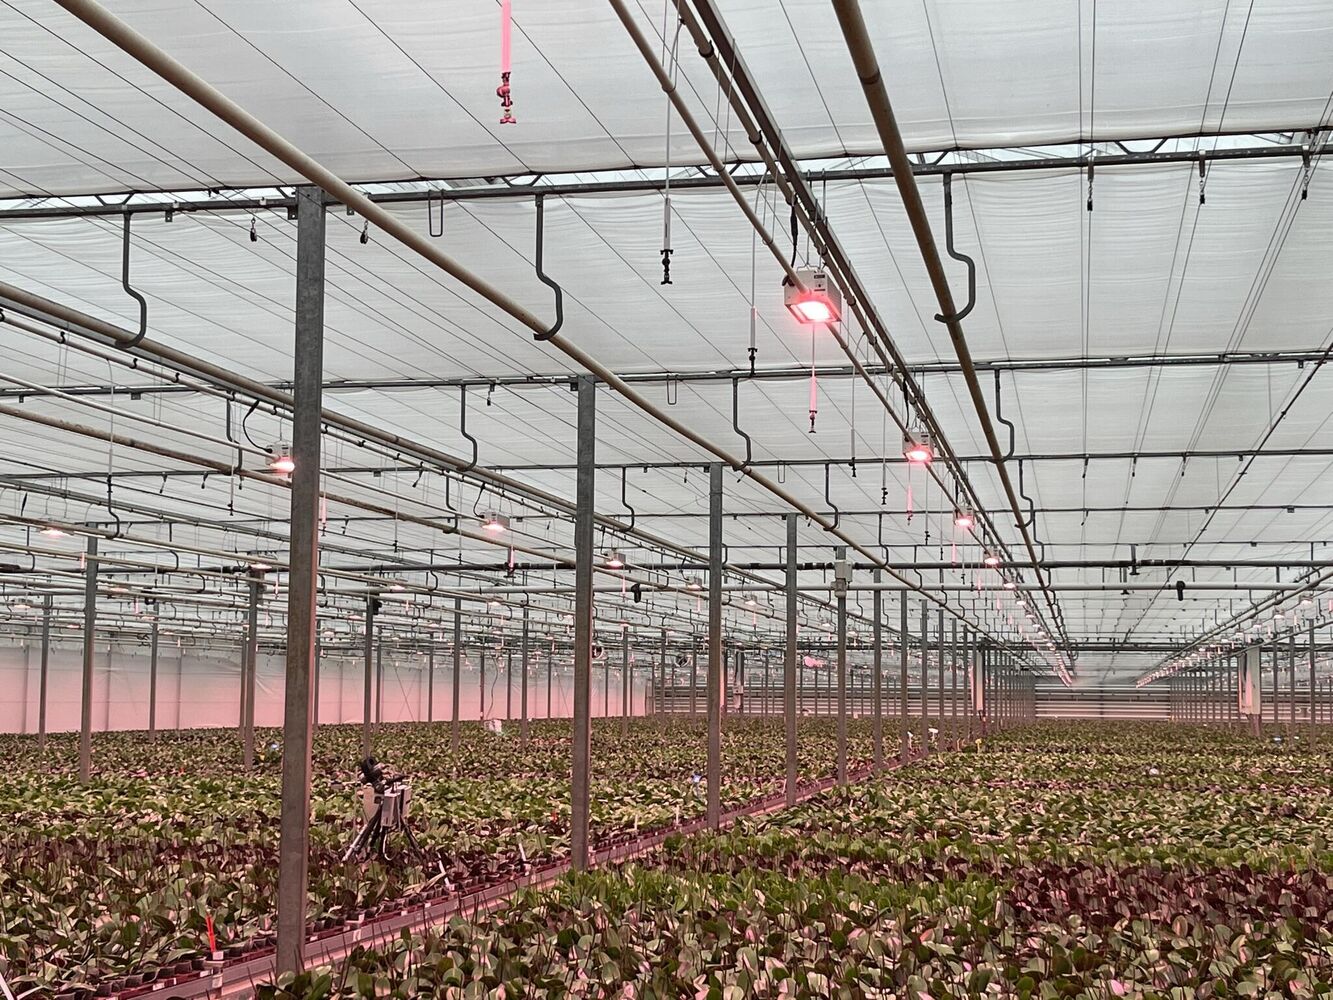 Floral Daily: Dimmable LED lights save phaleanopsis grower lots on energy costs